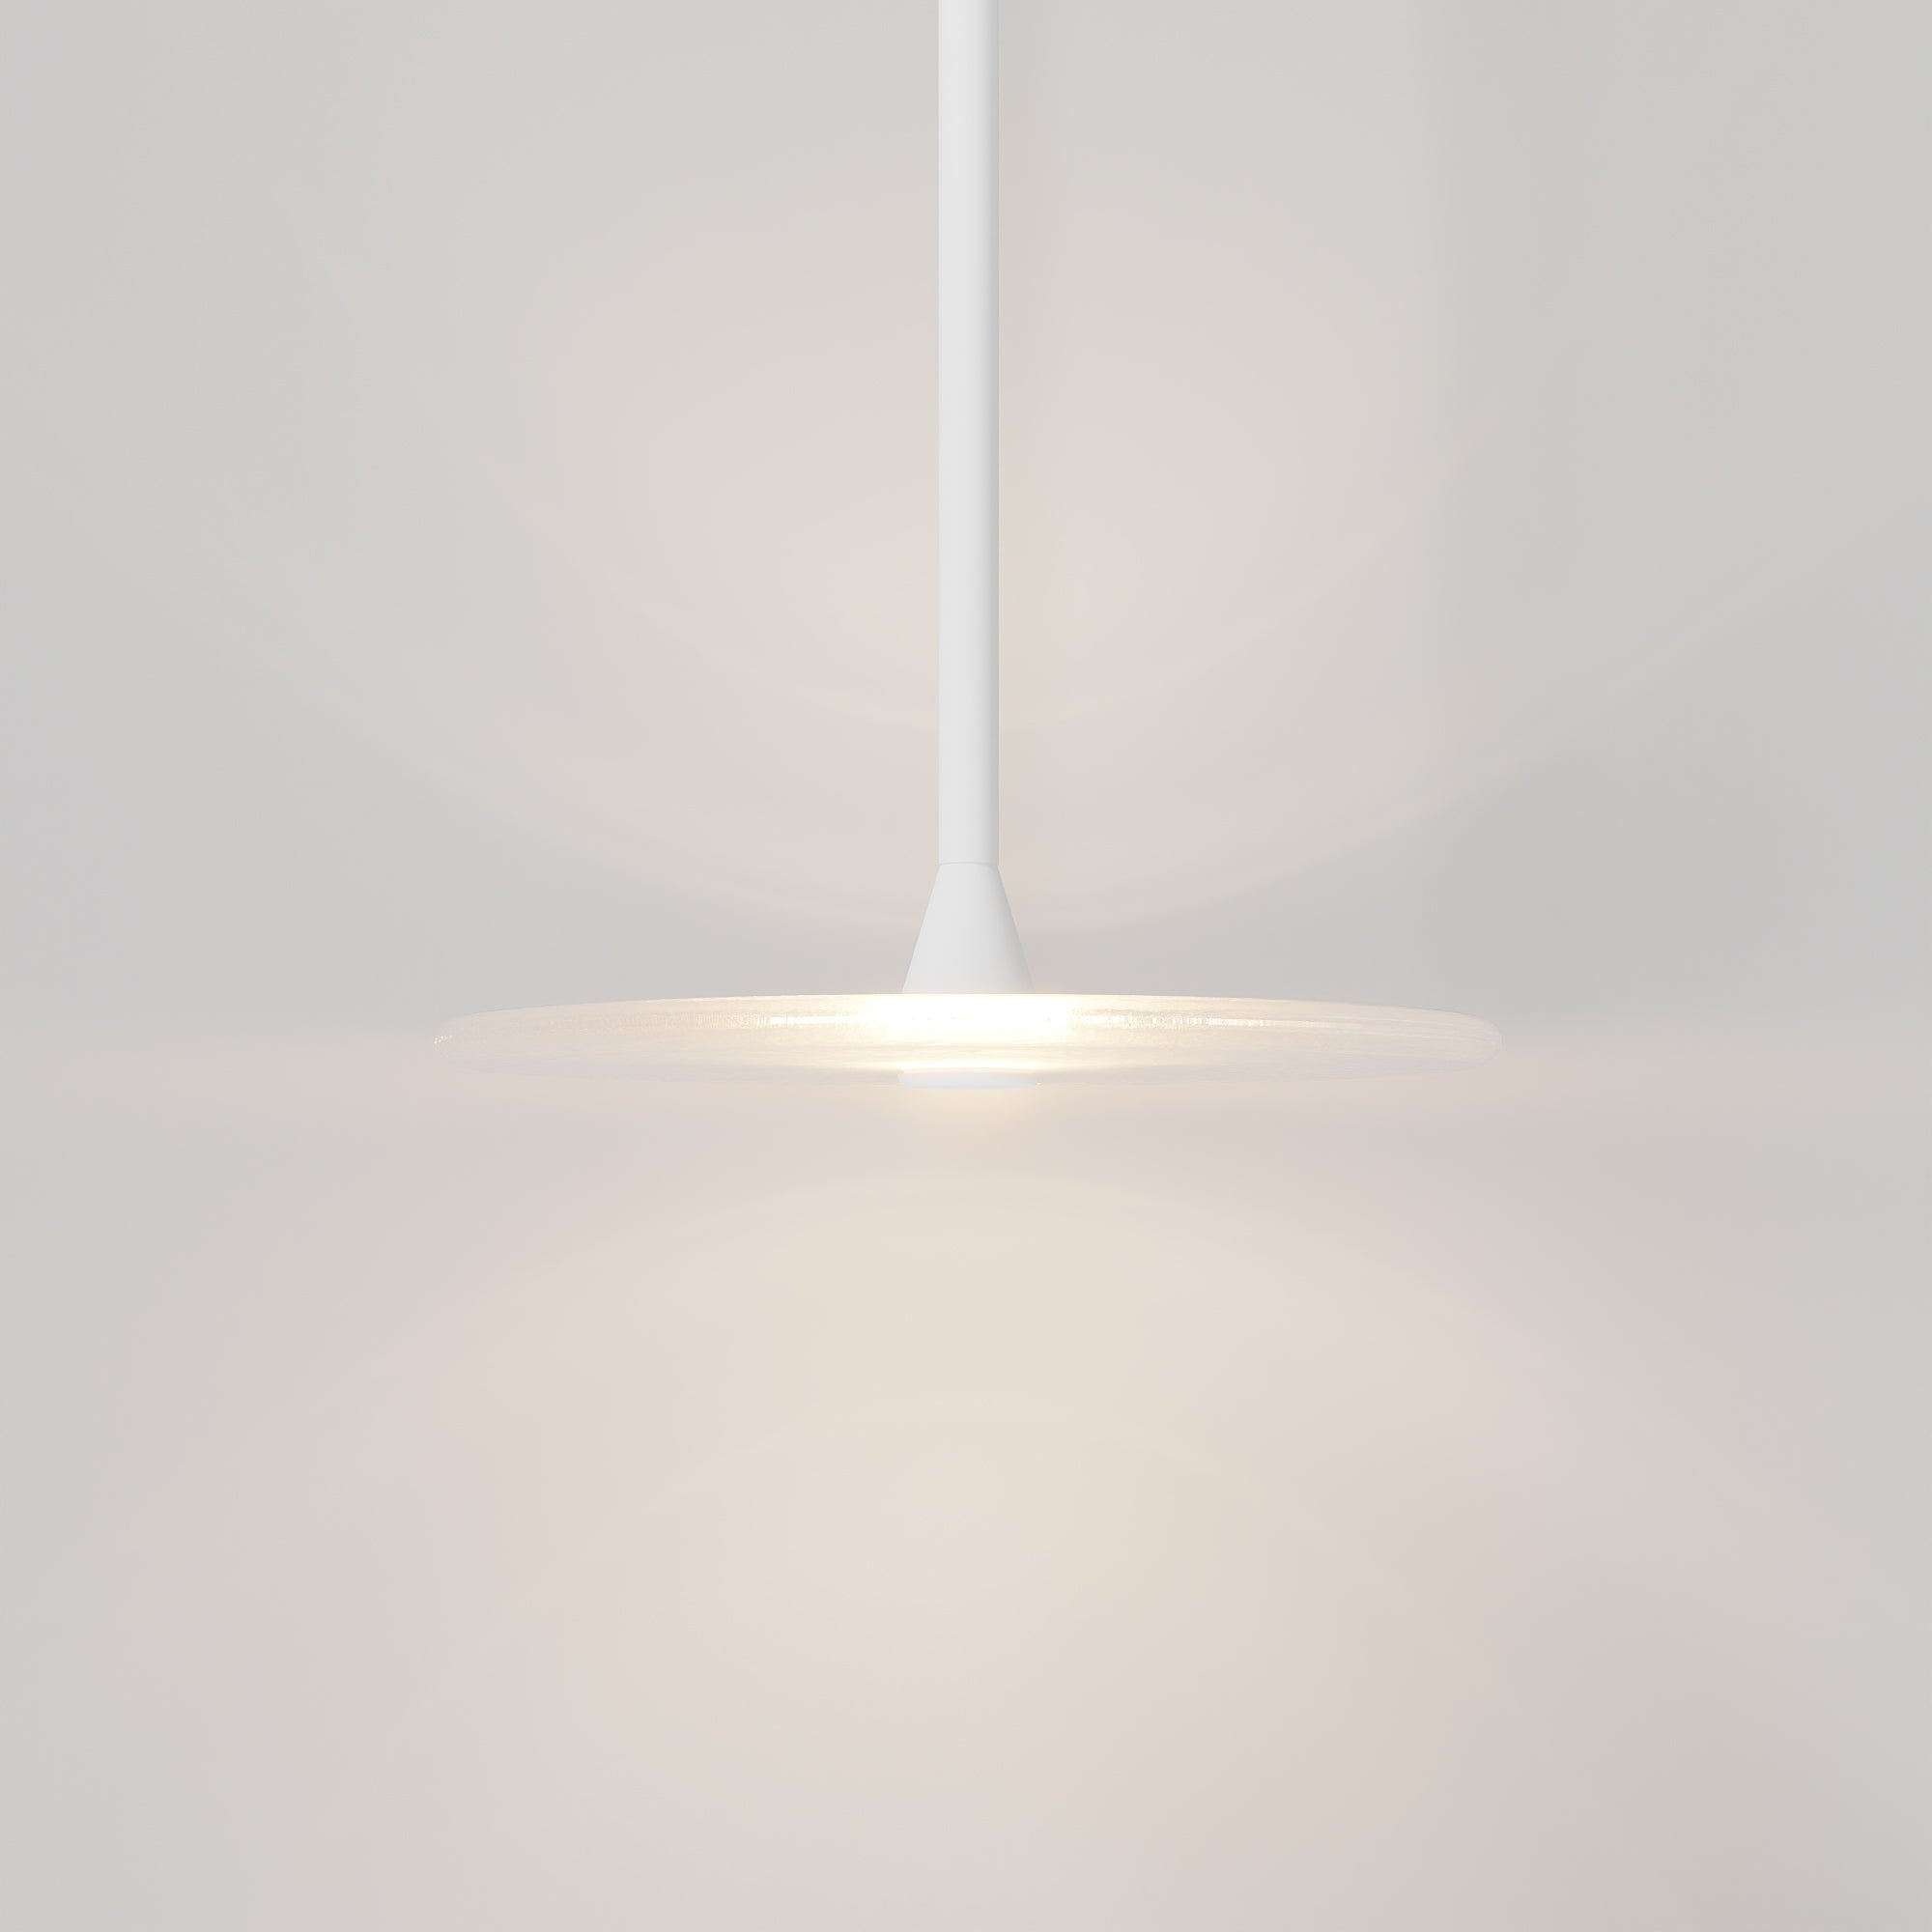 CORAL SINGLE ROD (FROSTED) - PENDANT LIGHT